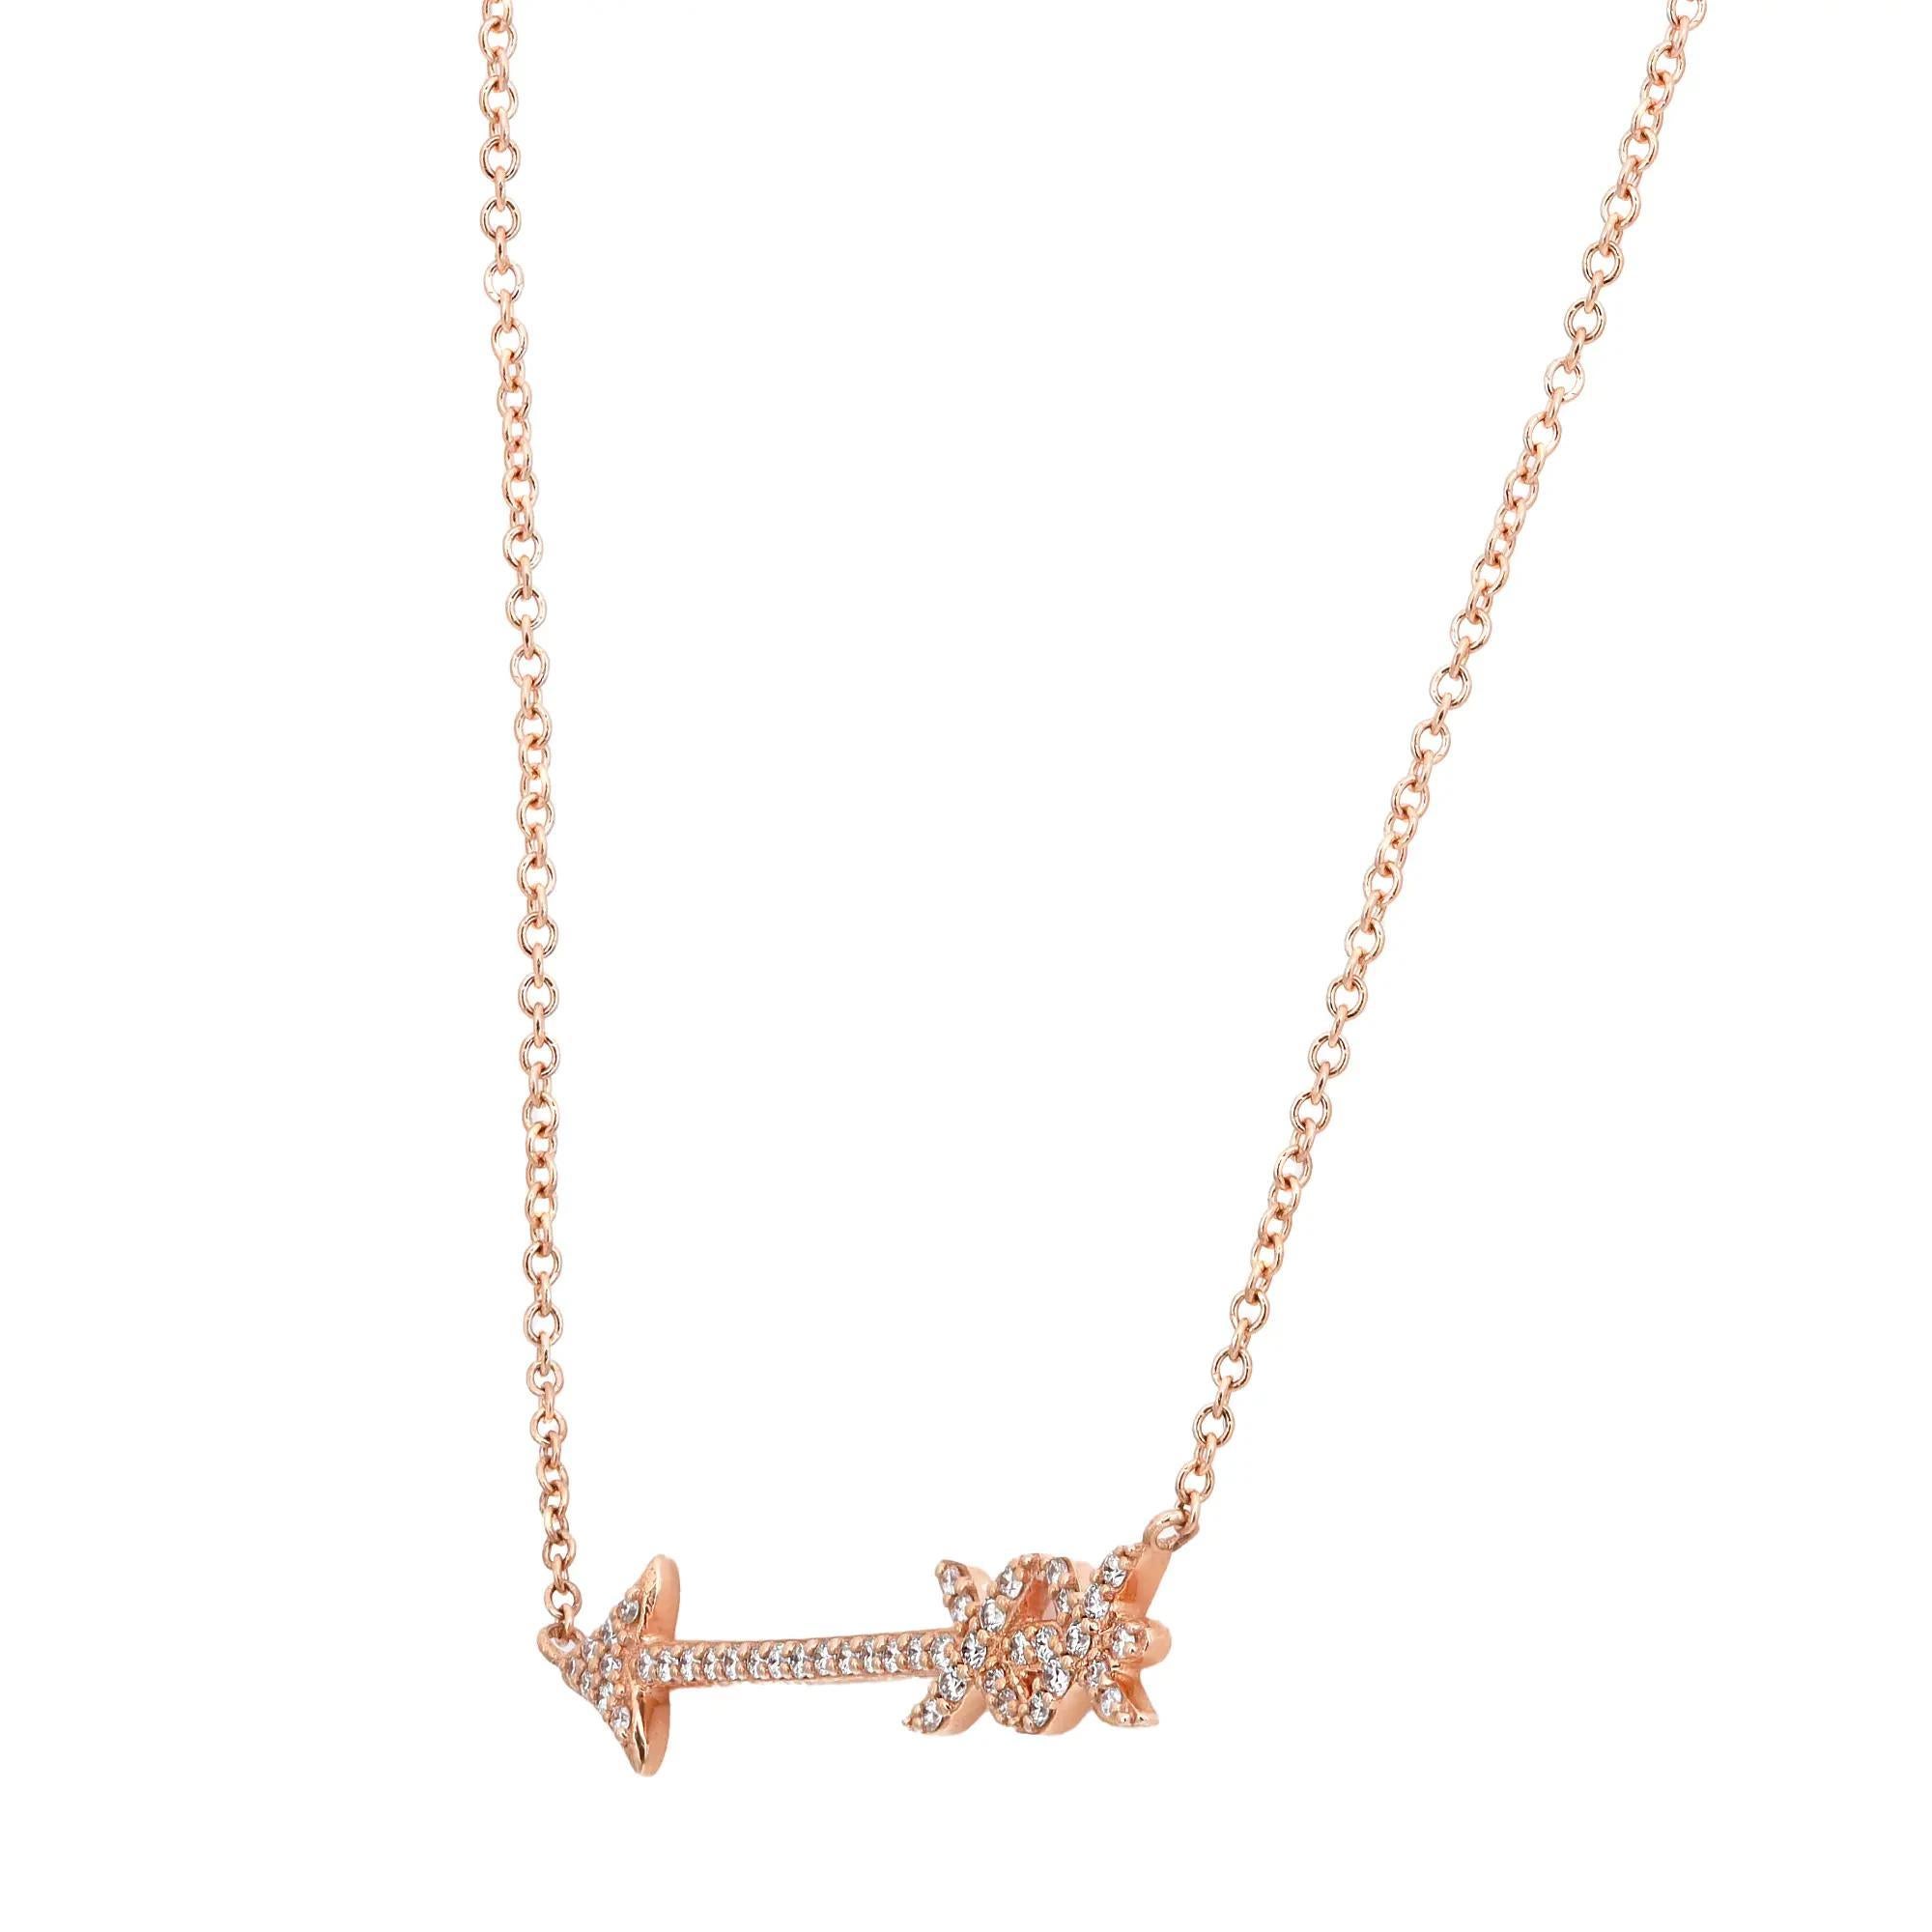 Round Cut Tiffany Paloma’s Graffiti Arrow Pendant Necklace 18K Rose Gold 18 Inches For Sale